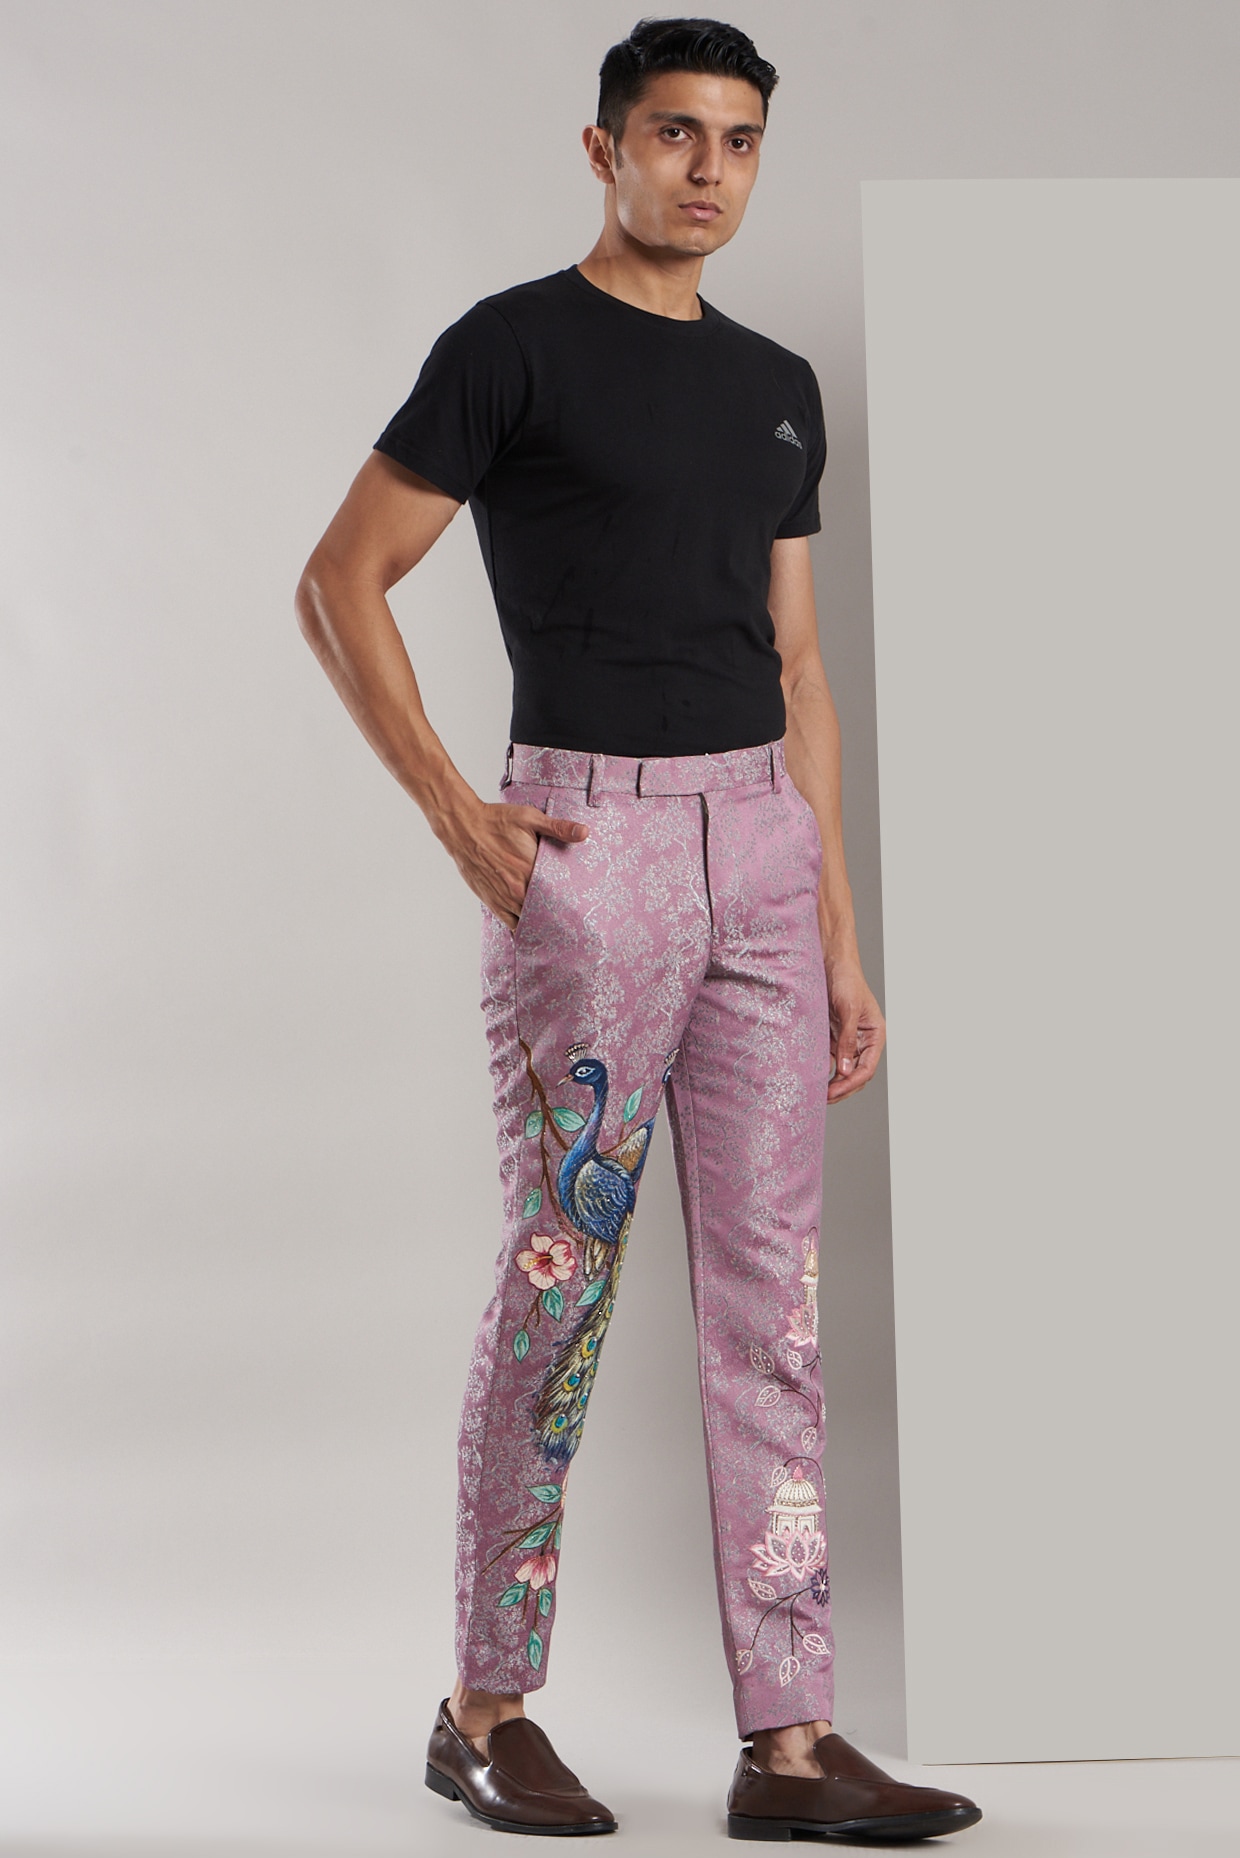 SAXX Underwear Snooze Floral Print Pants  Southcentre Mall